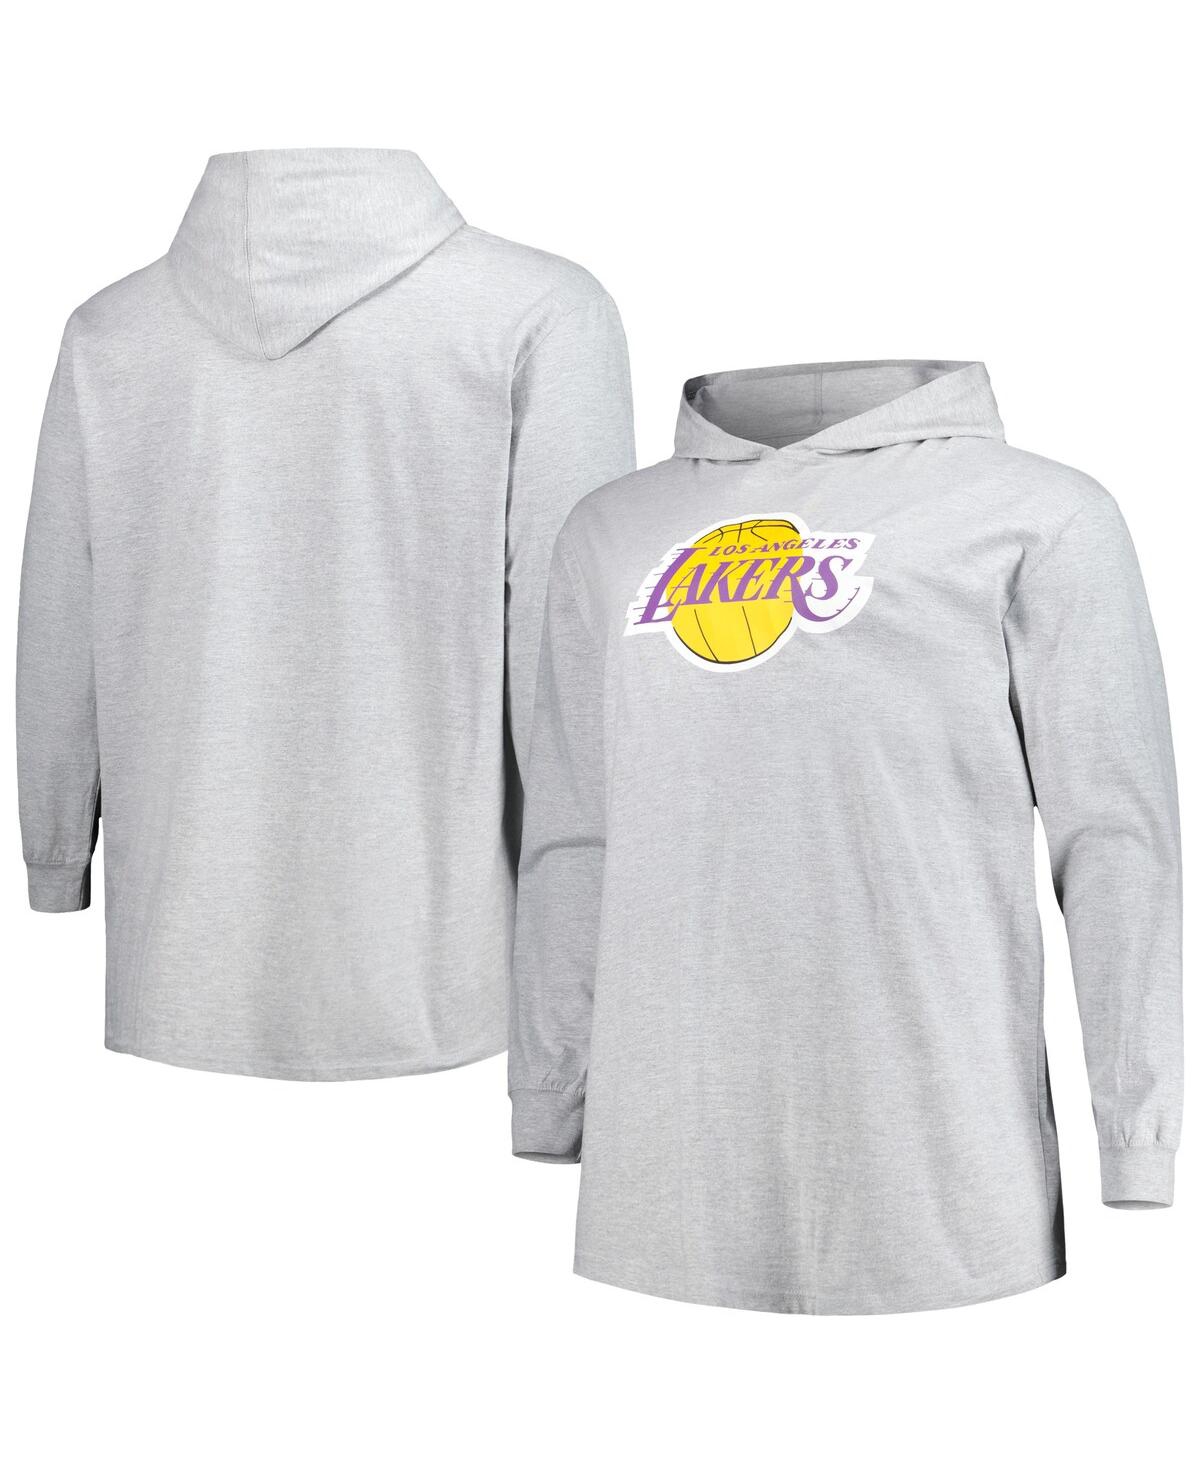 Shop Fanatics Men's  Heather Gray Los Angeles Lakers Big And Tall Pullover Hoodie